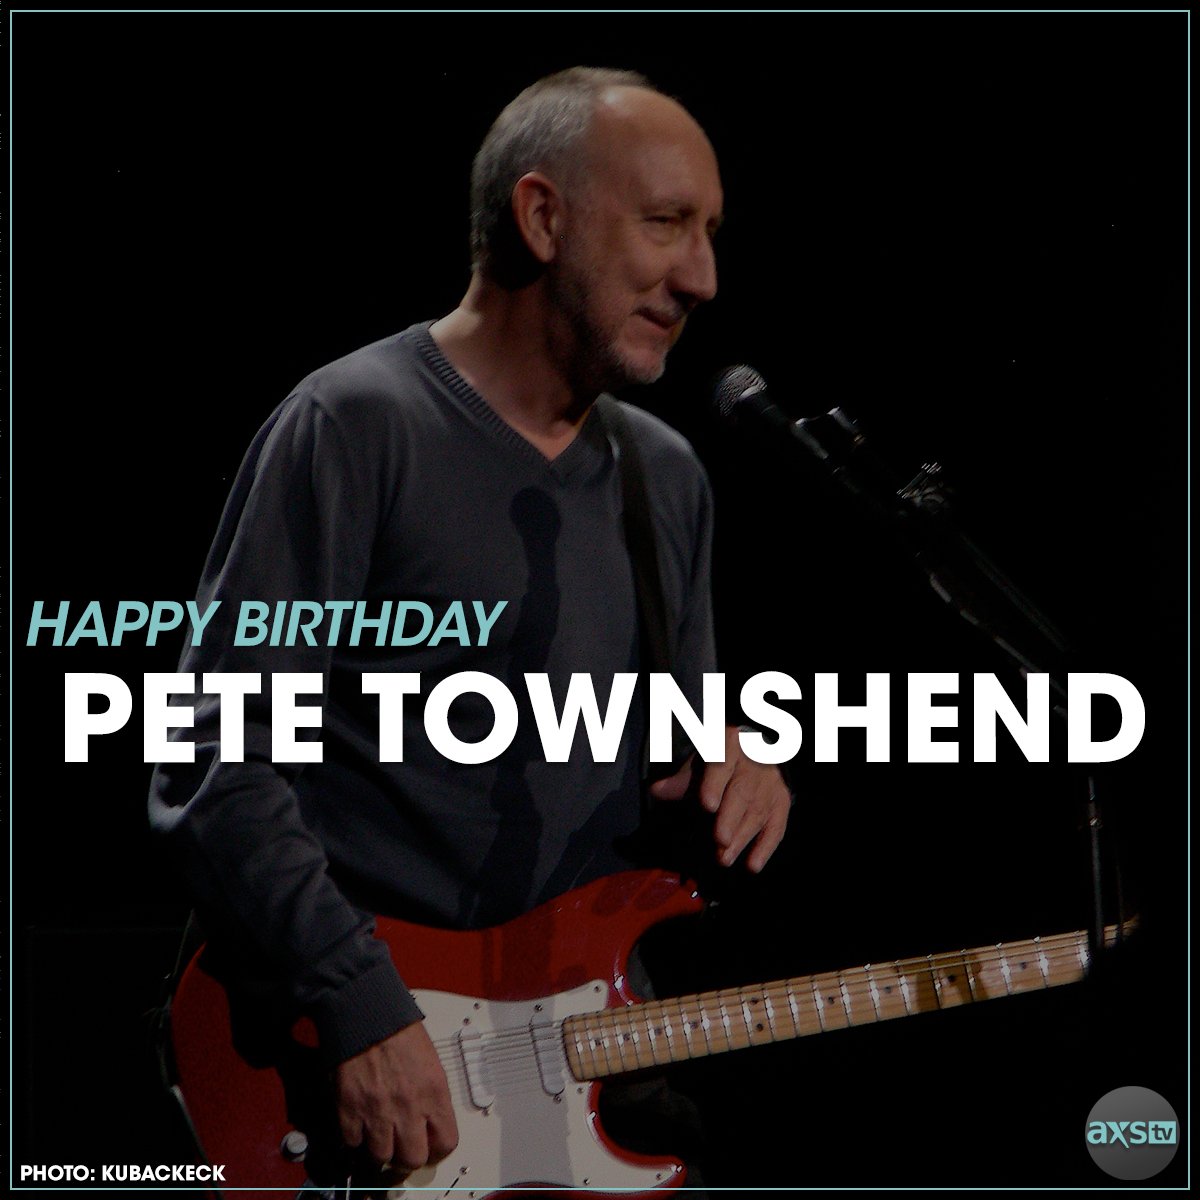 Happy Birthday to Pete Townshend of 